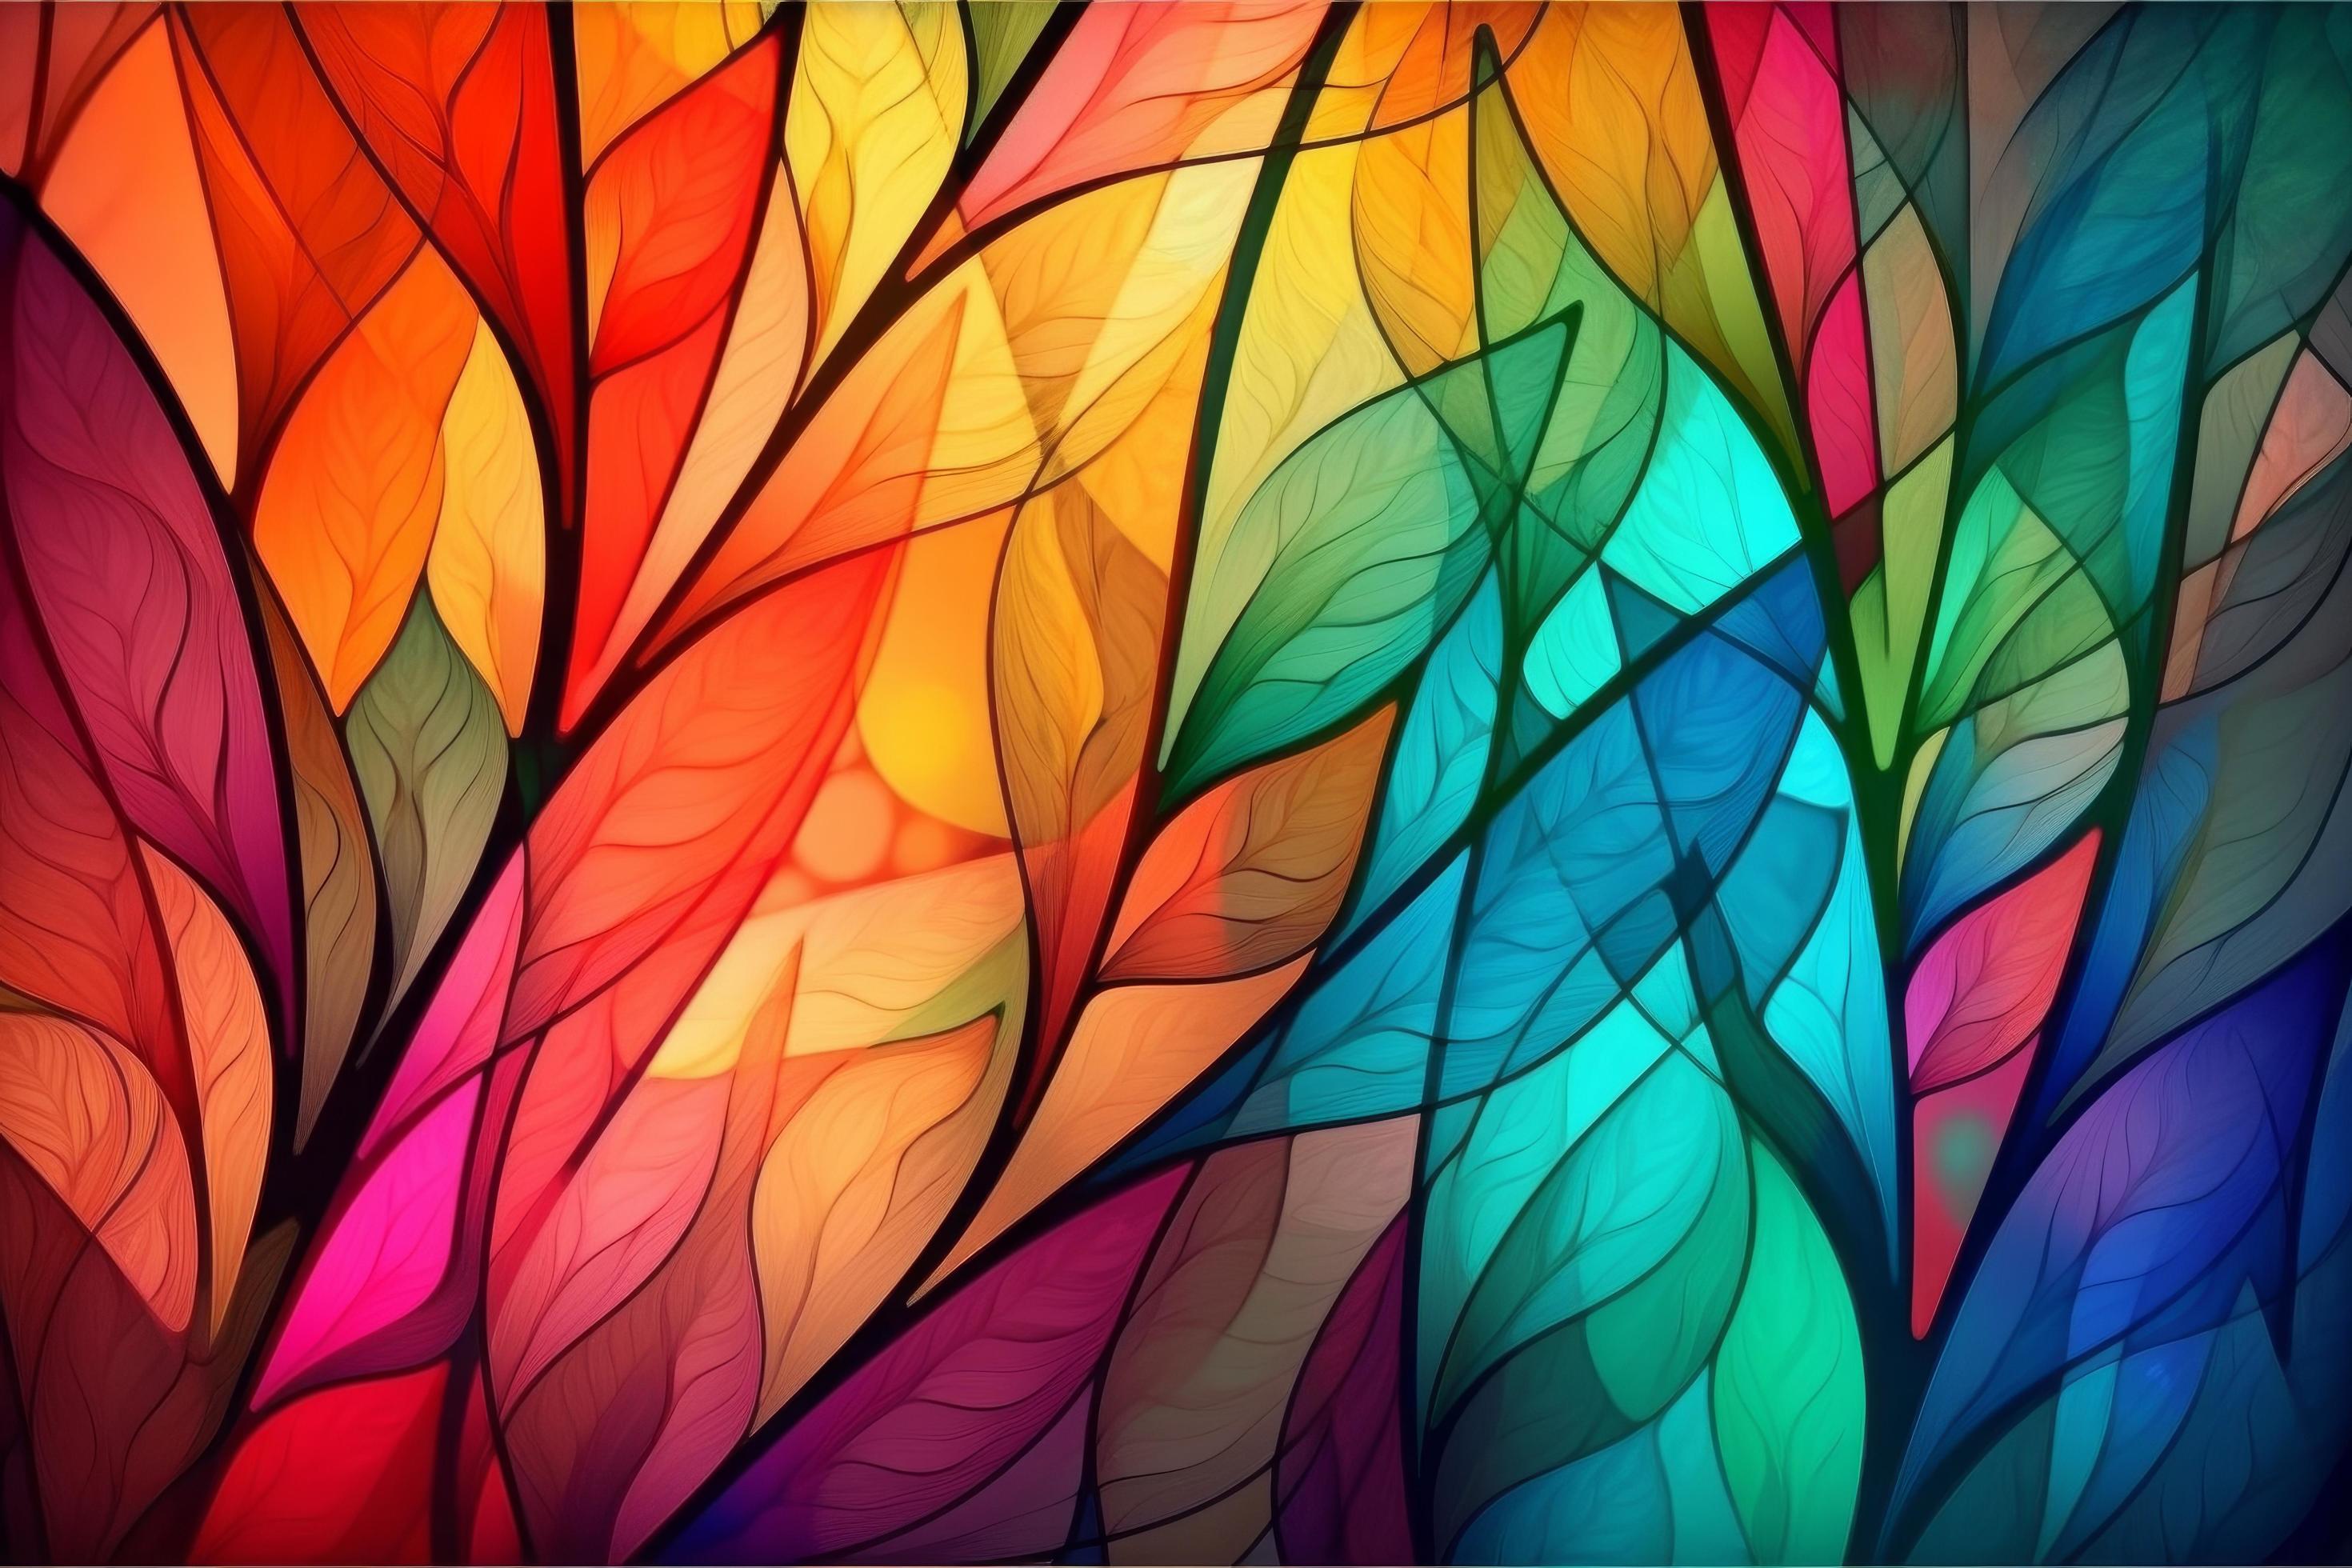 49+] Stained Glass Wallpaper for Windows - WallpaperSafari